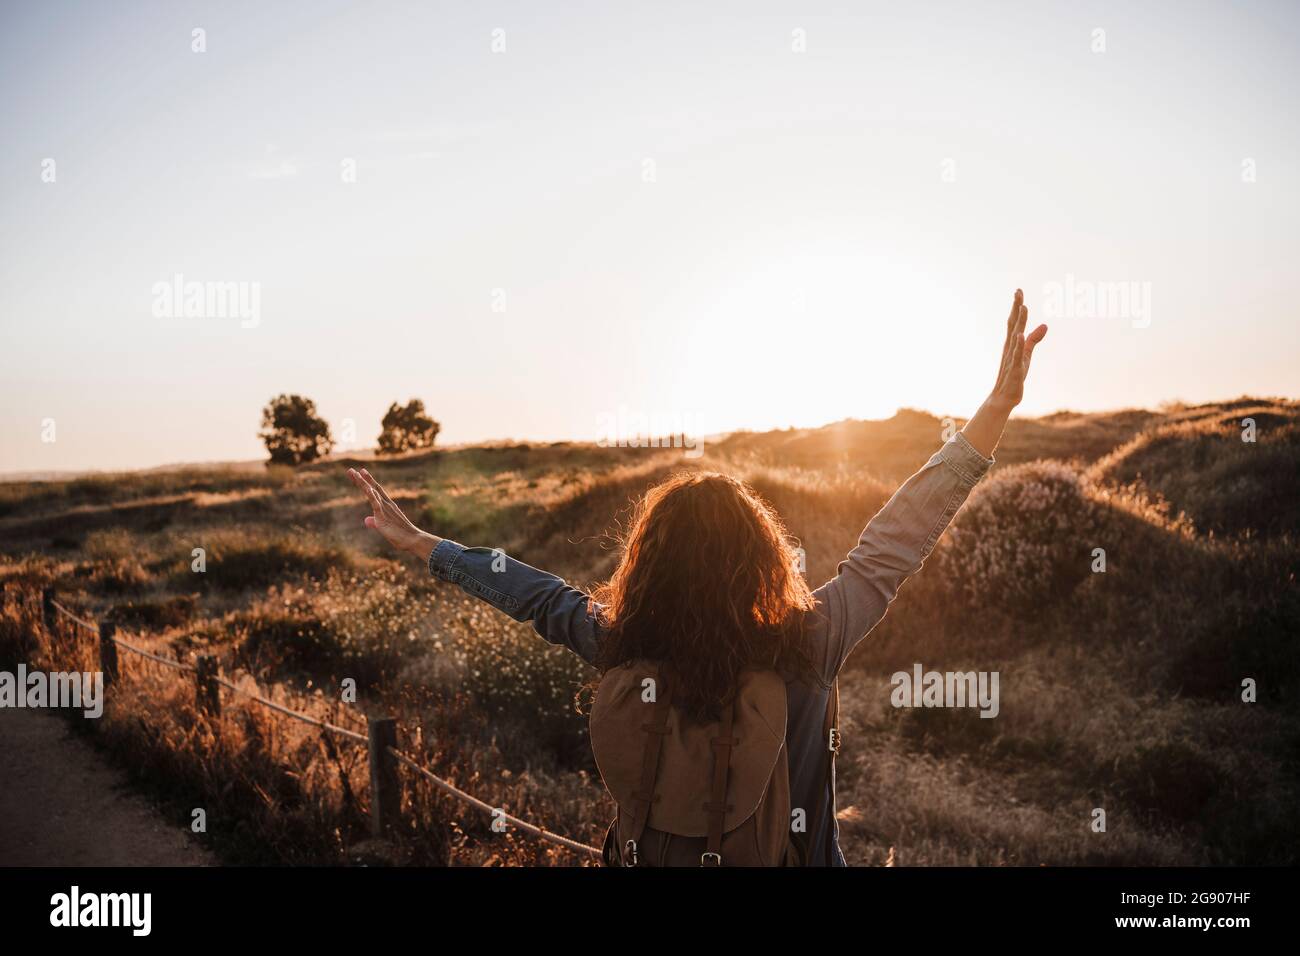 Carefree woman standing with arms raised in nature during sunset Stock Photo